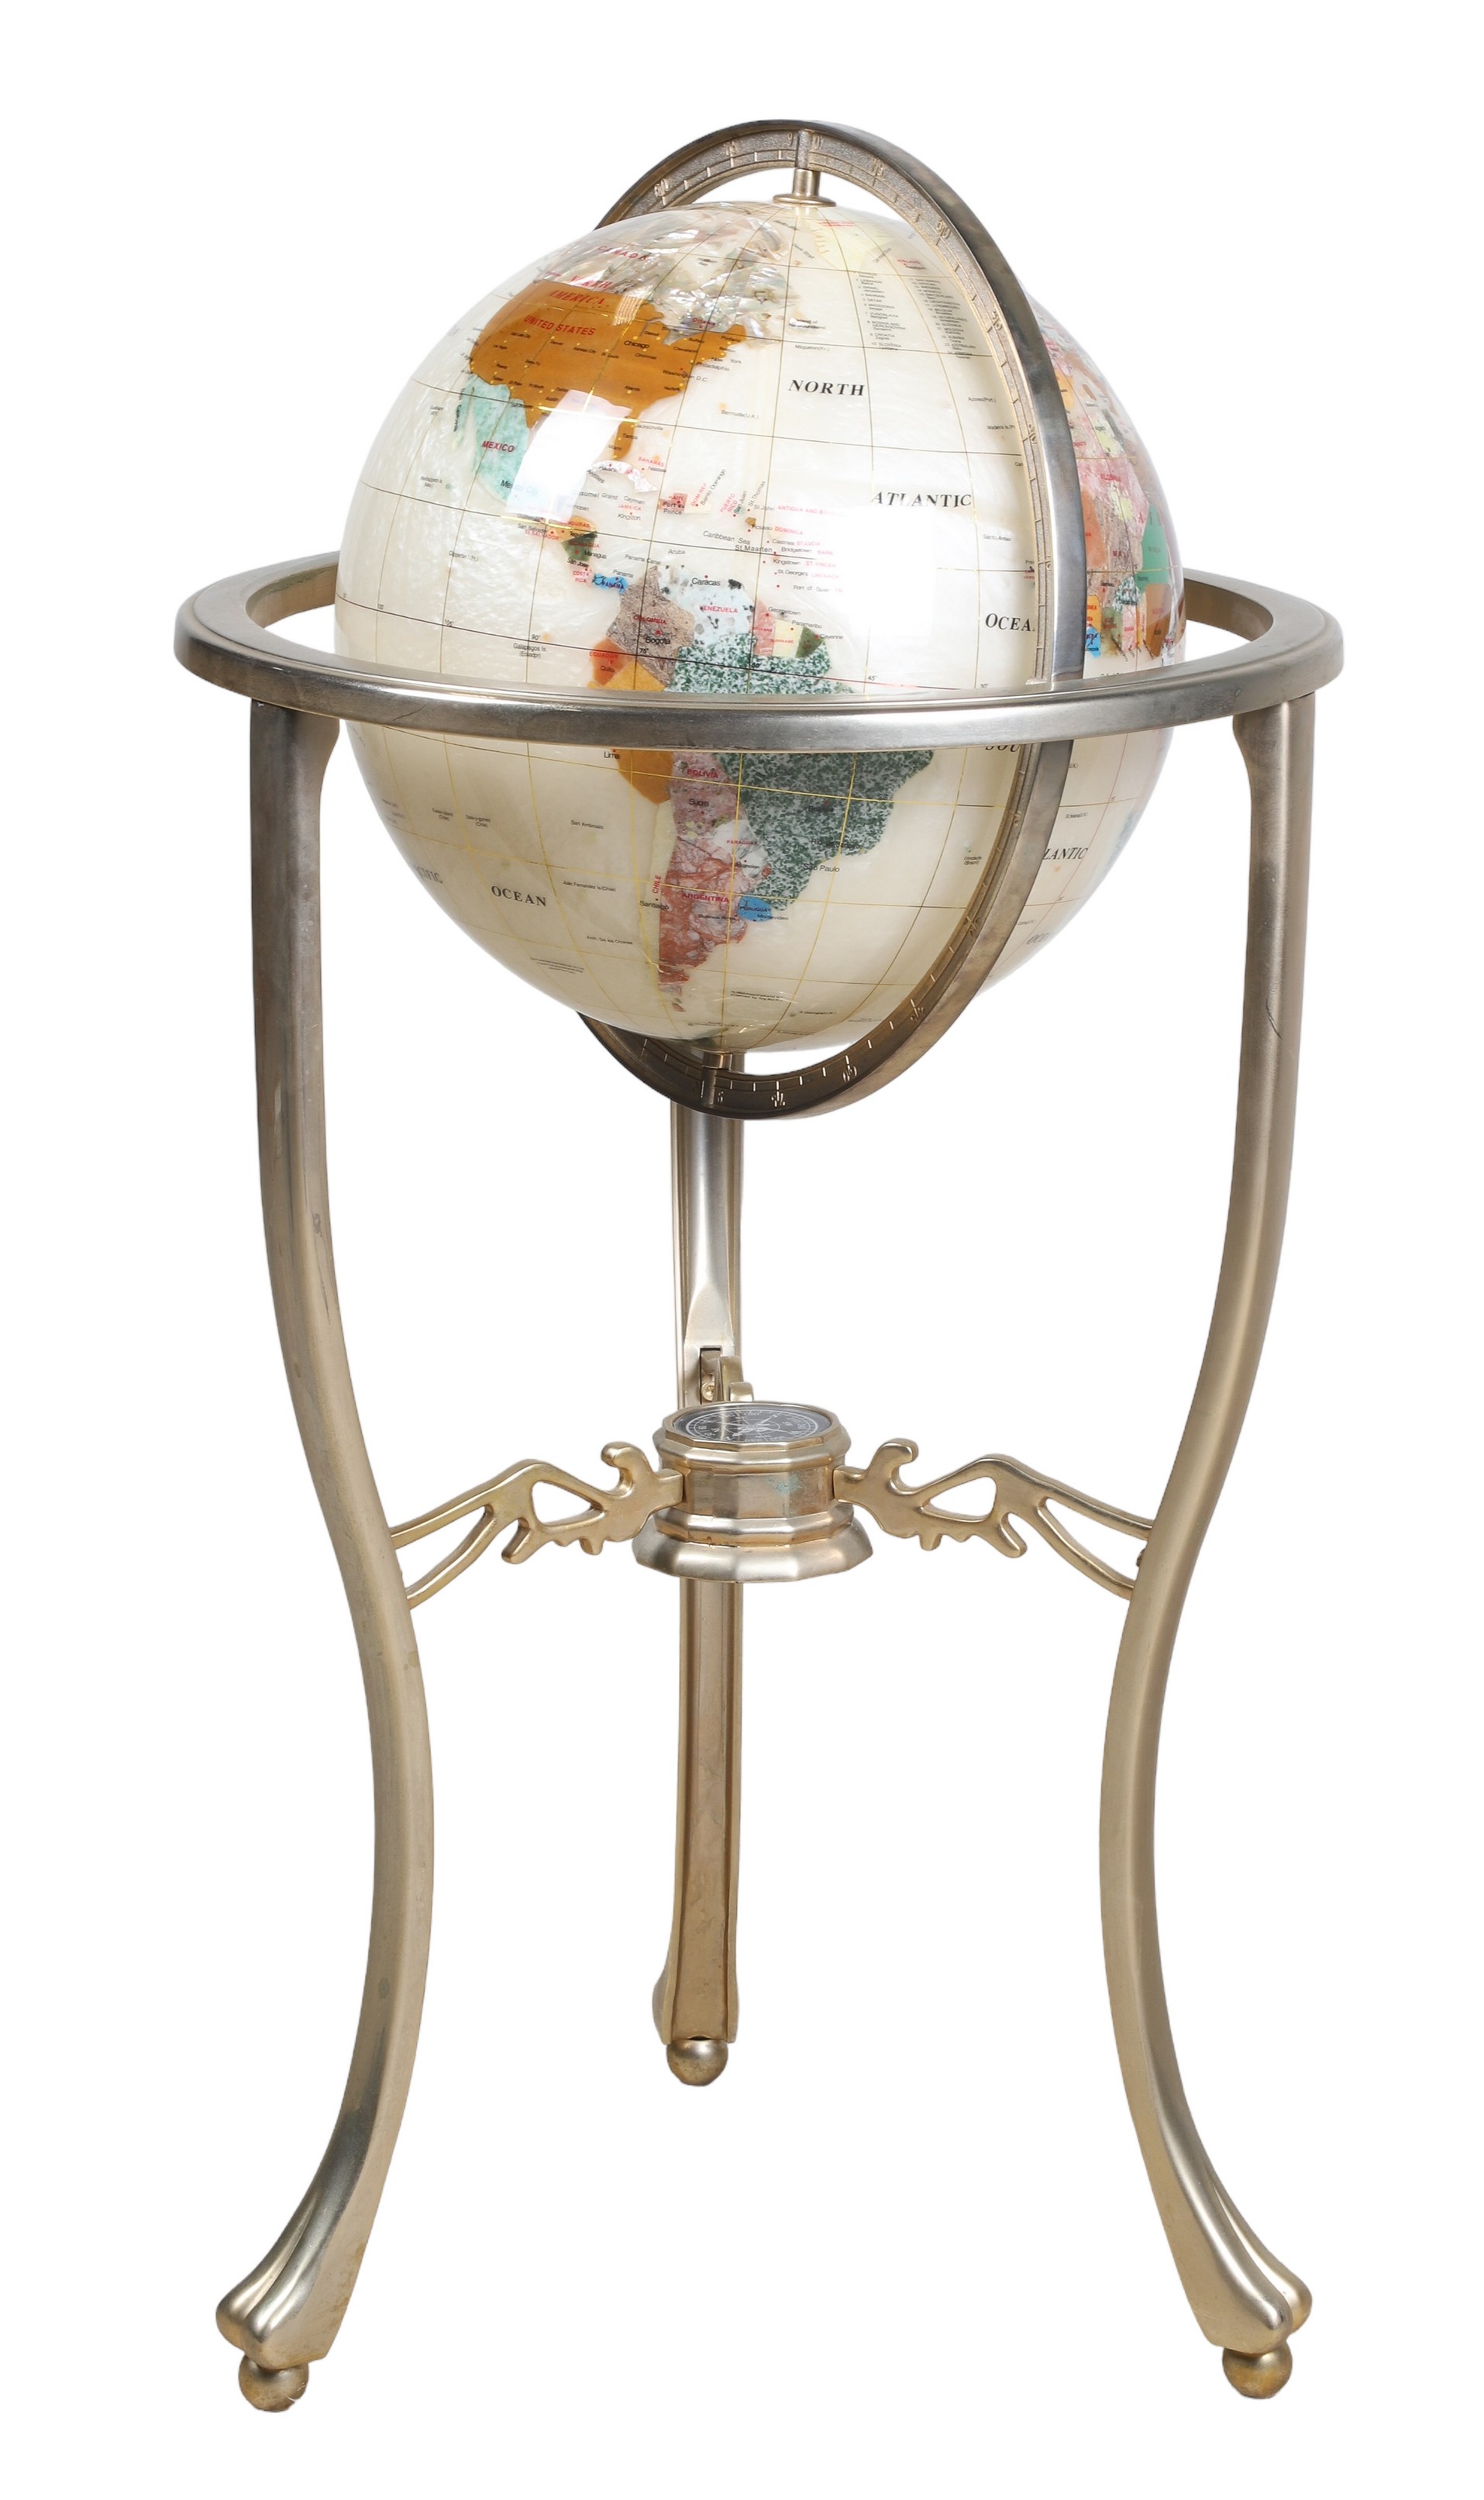 Contemporary mineral inlaid globe on